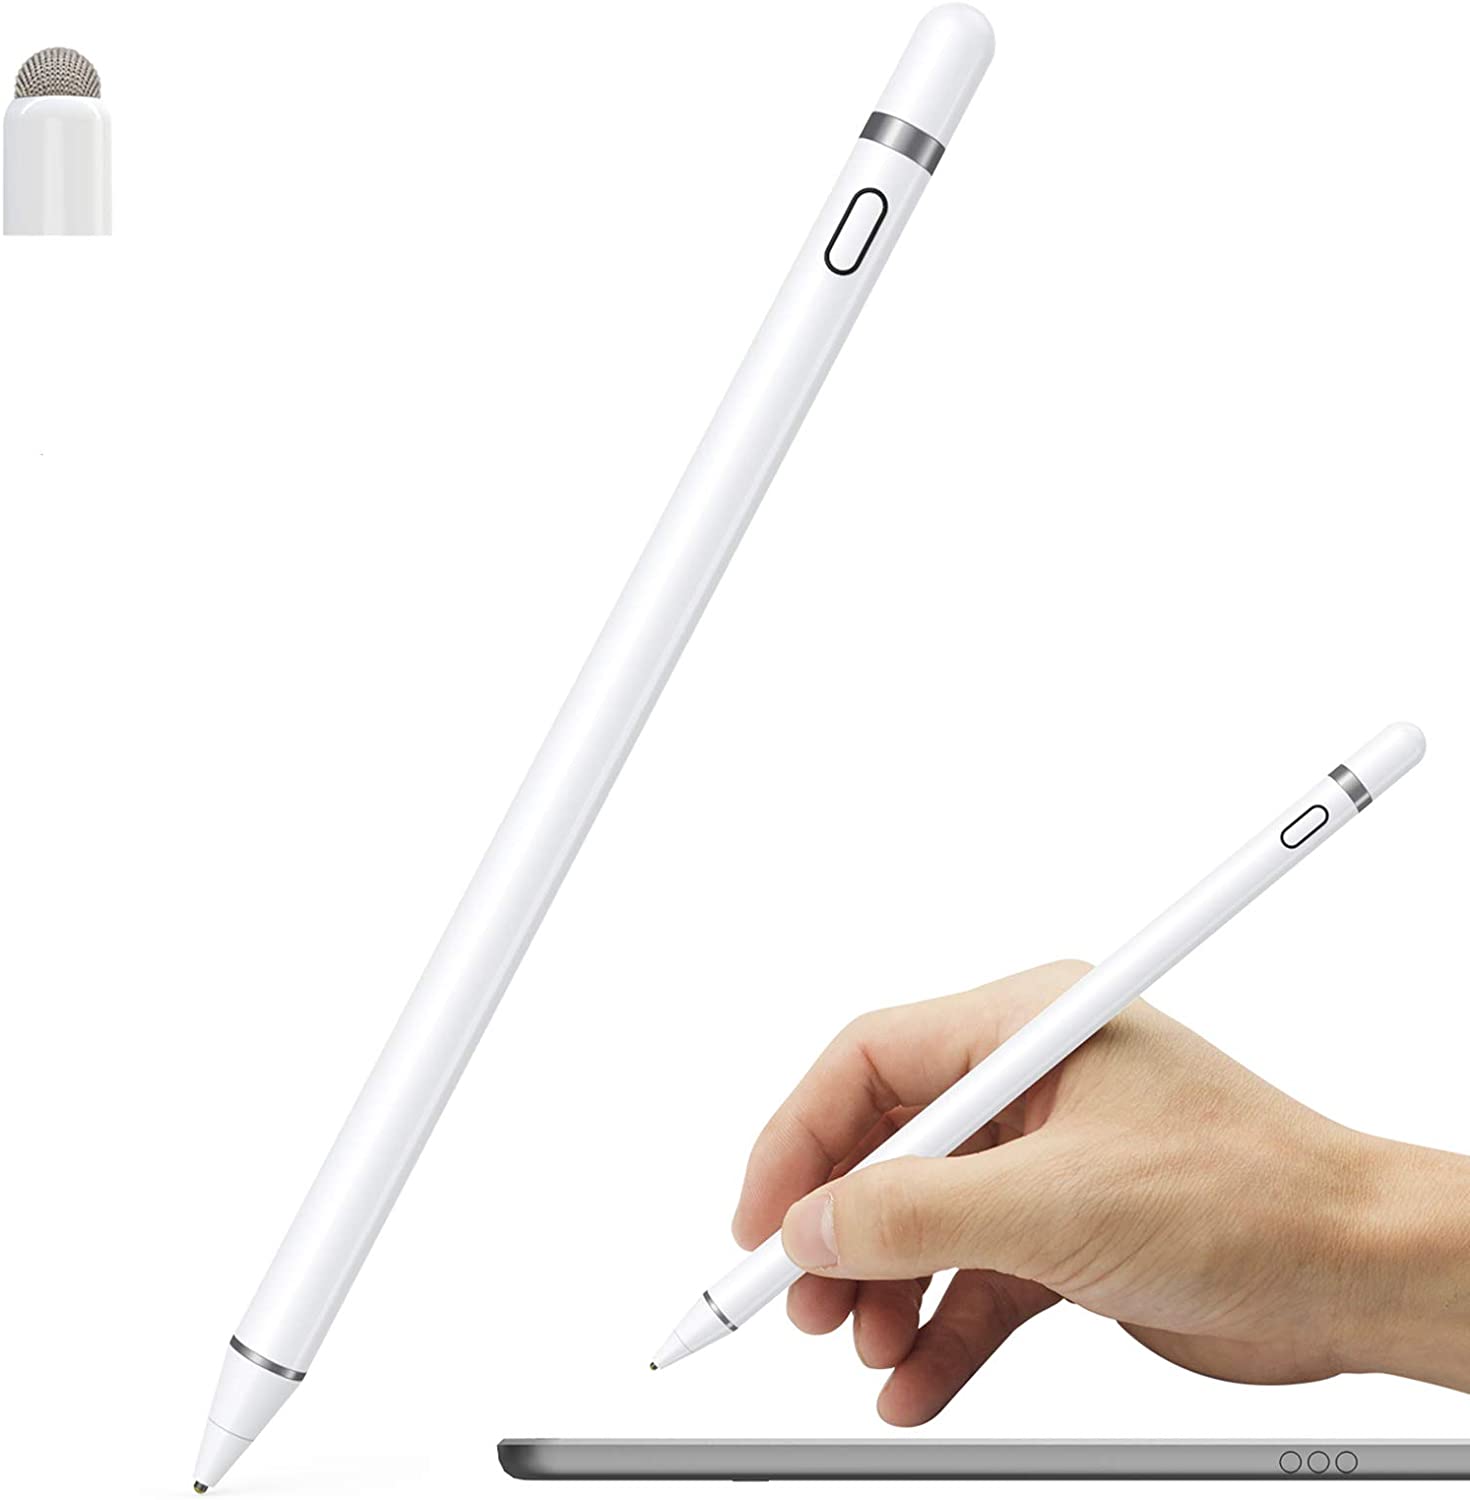 Manufacturer Active Stylus Pen For Ipad - Active Stylus Pen Compatible for iOS&Android Touch Screens, Pencil for iPad with Dual Touch Function,Rechargeable Stylus for iPad/iPad Pro/Air/Mini/iP...